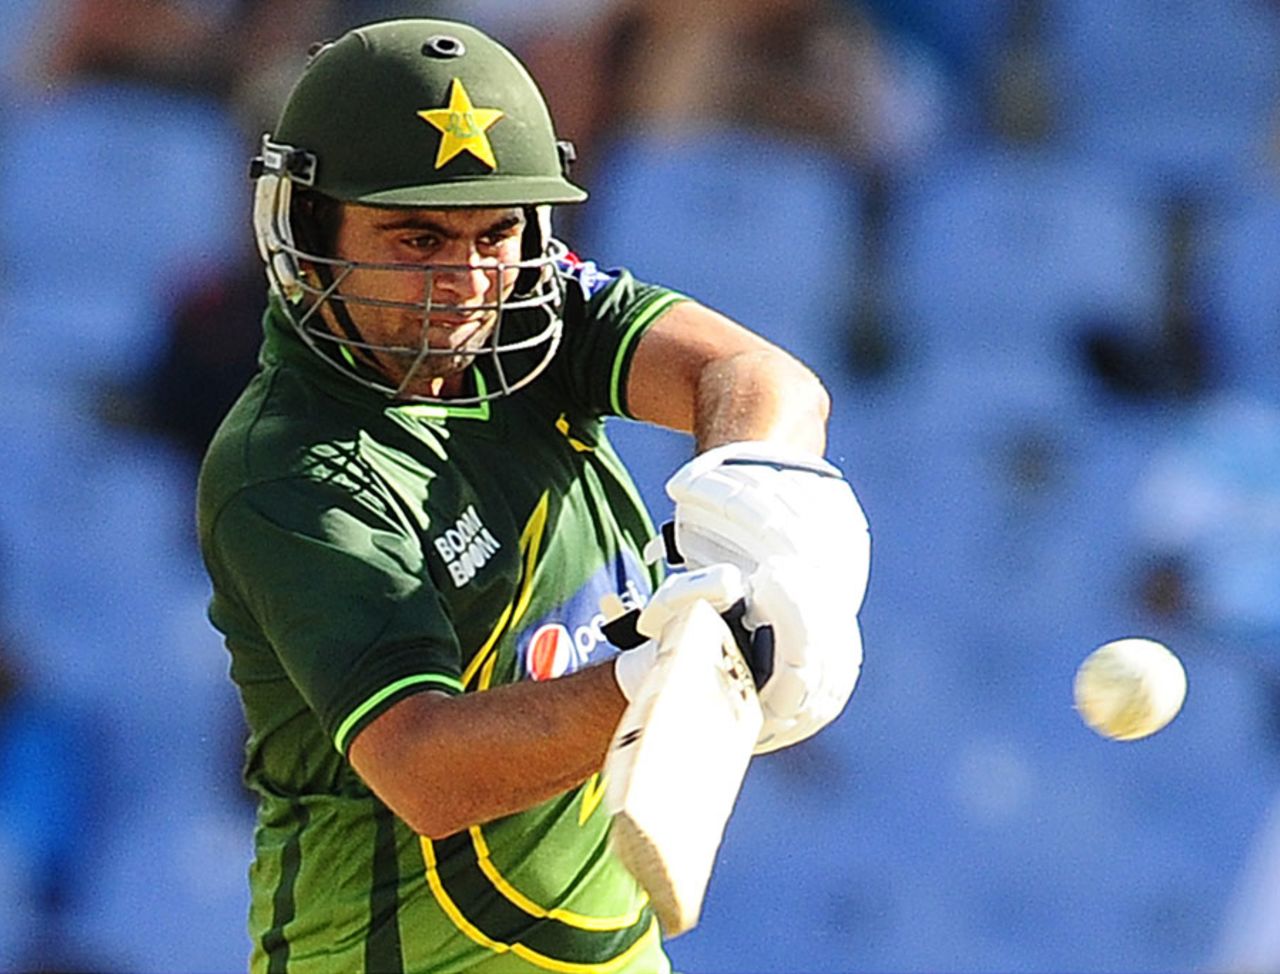 Ahmed Shehzad prepares to pull, West Indies v Pakistan, 2nd ODI, Gros Islet, April 25, 2011